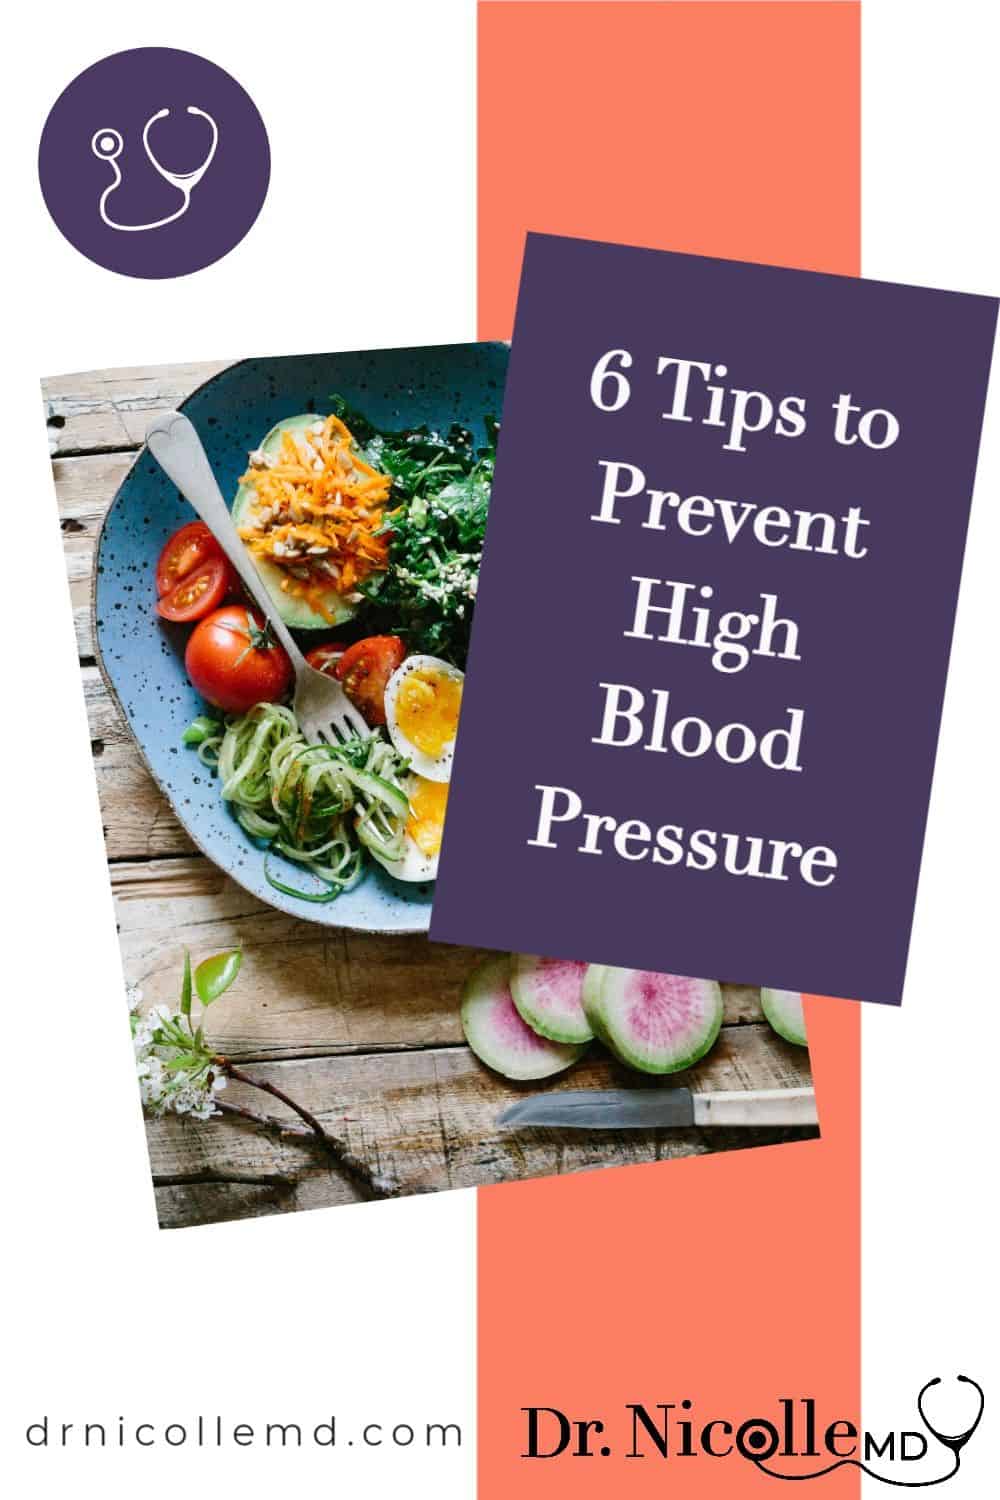 How to Prevent High Blood Pressure